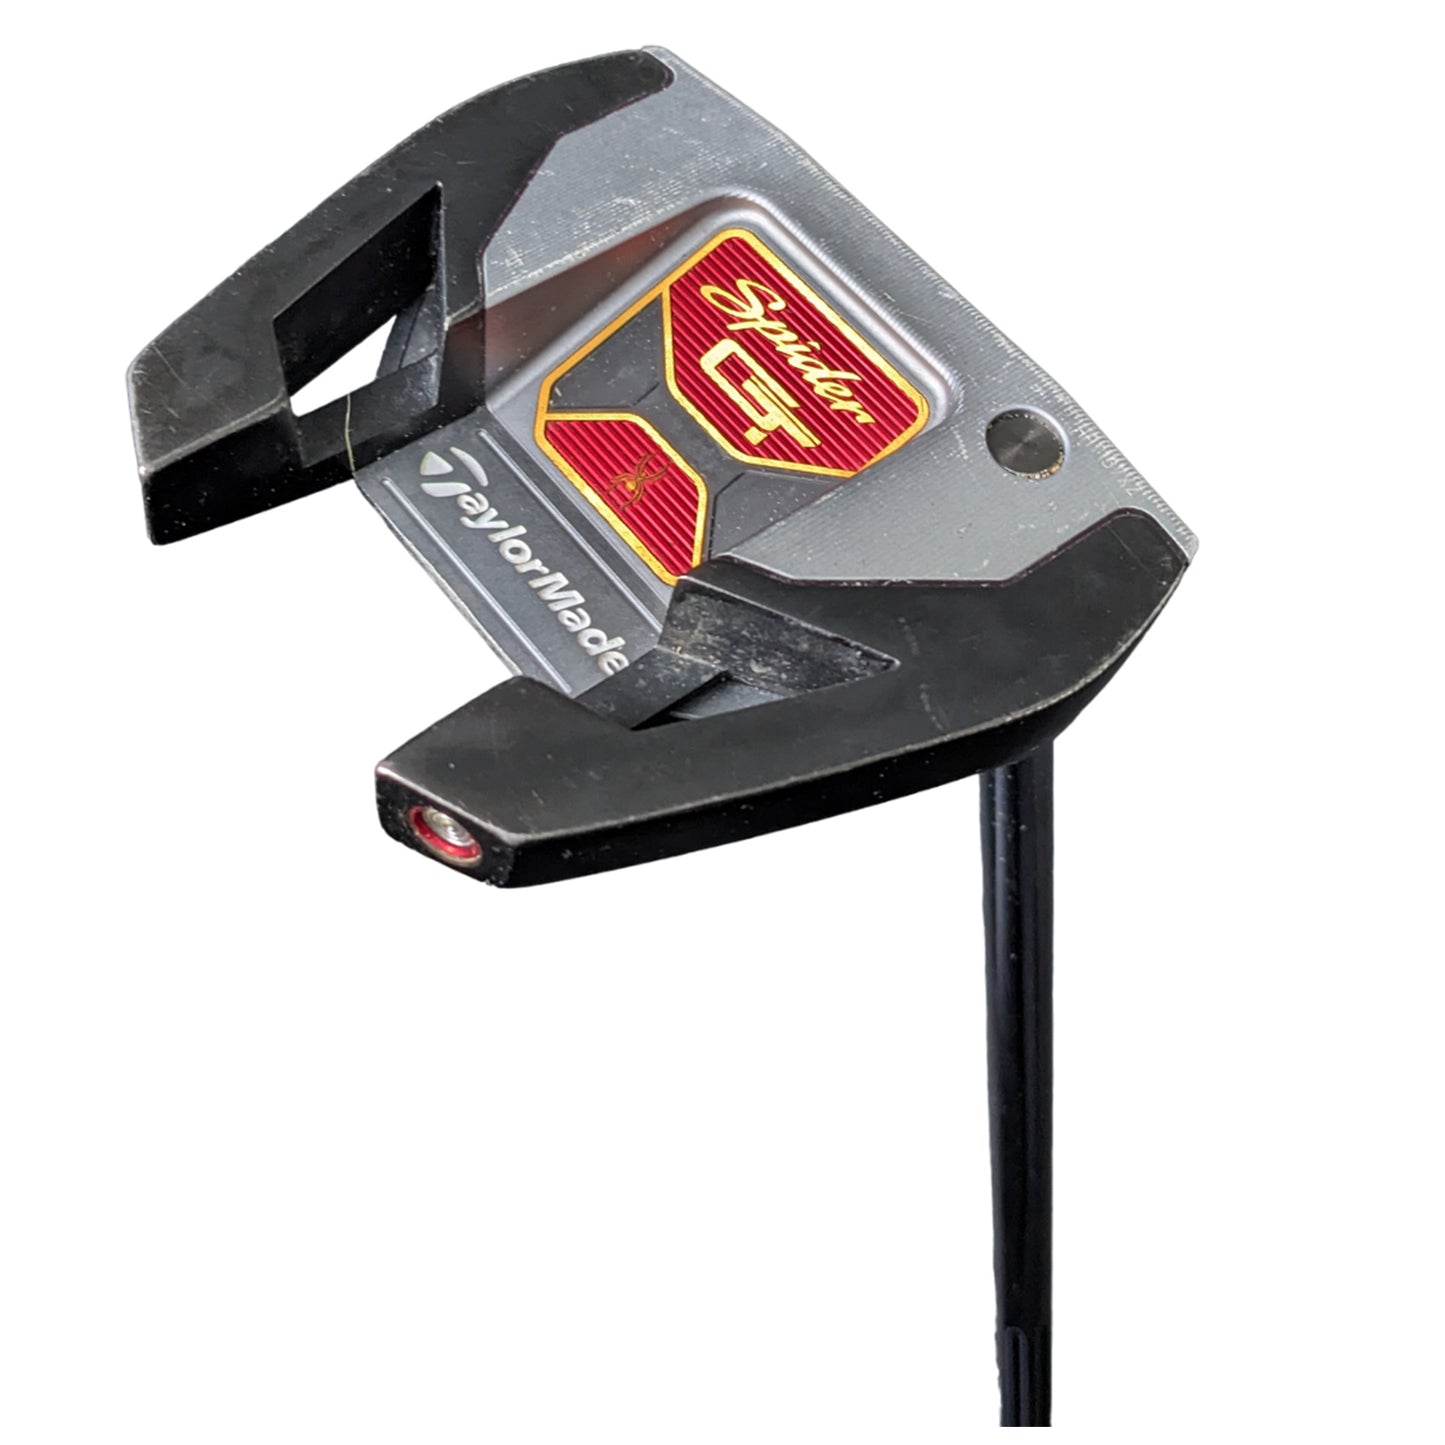 Second Hand TaylorMade Mens Spider GT Putter